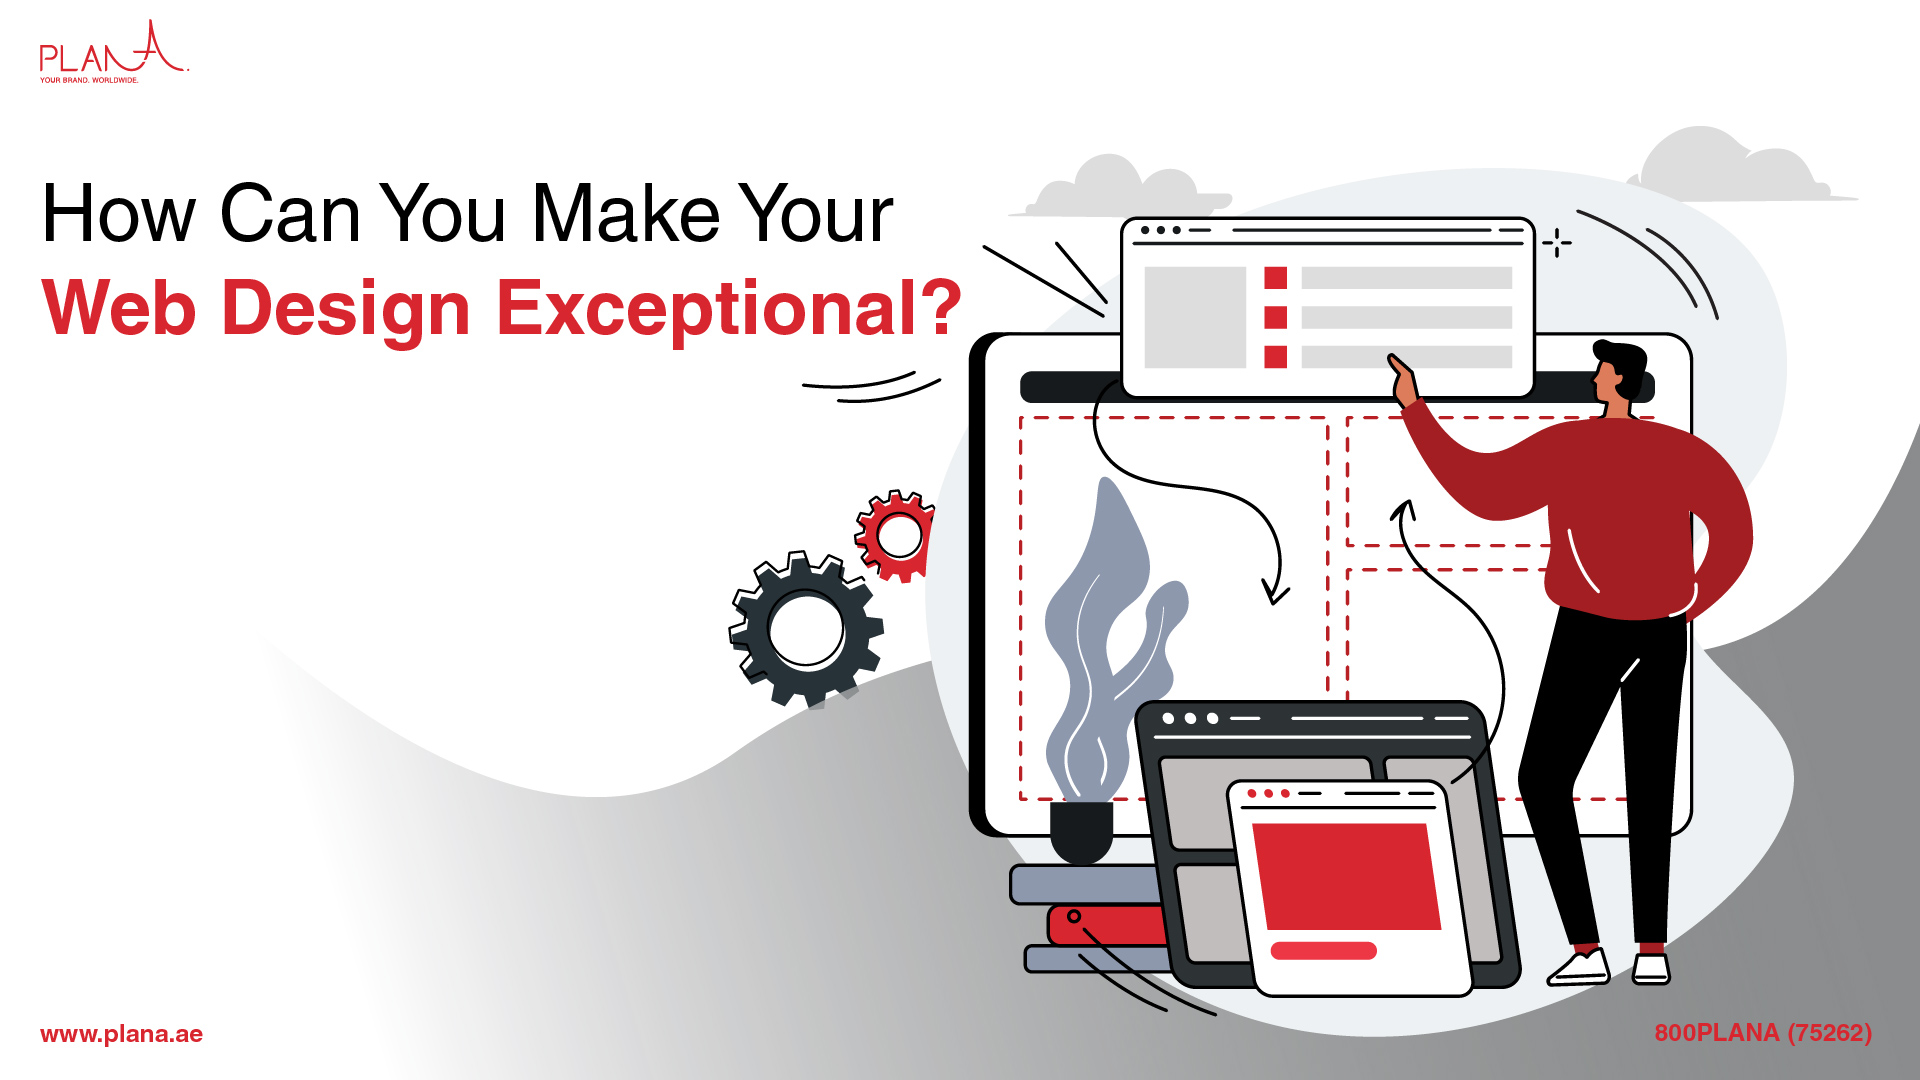 How Can You Make Your Web Design Exceptional?